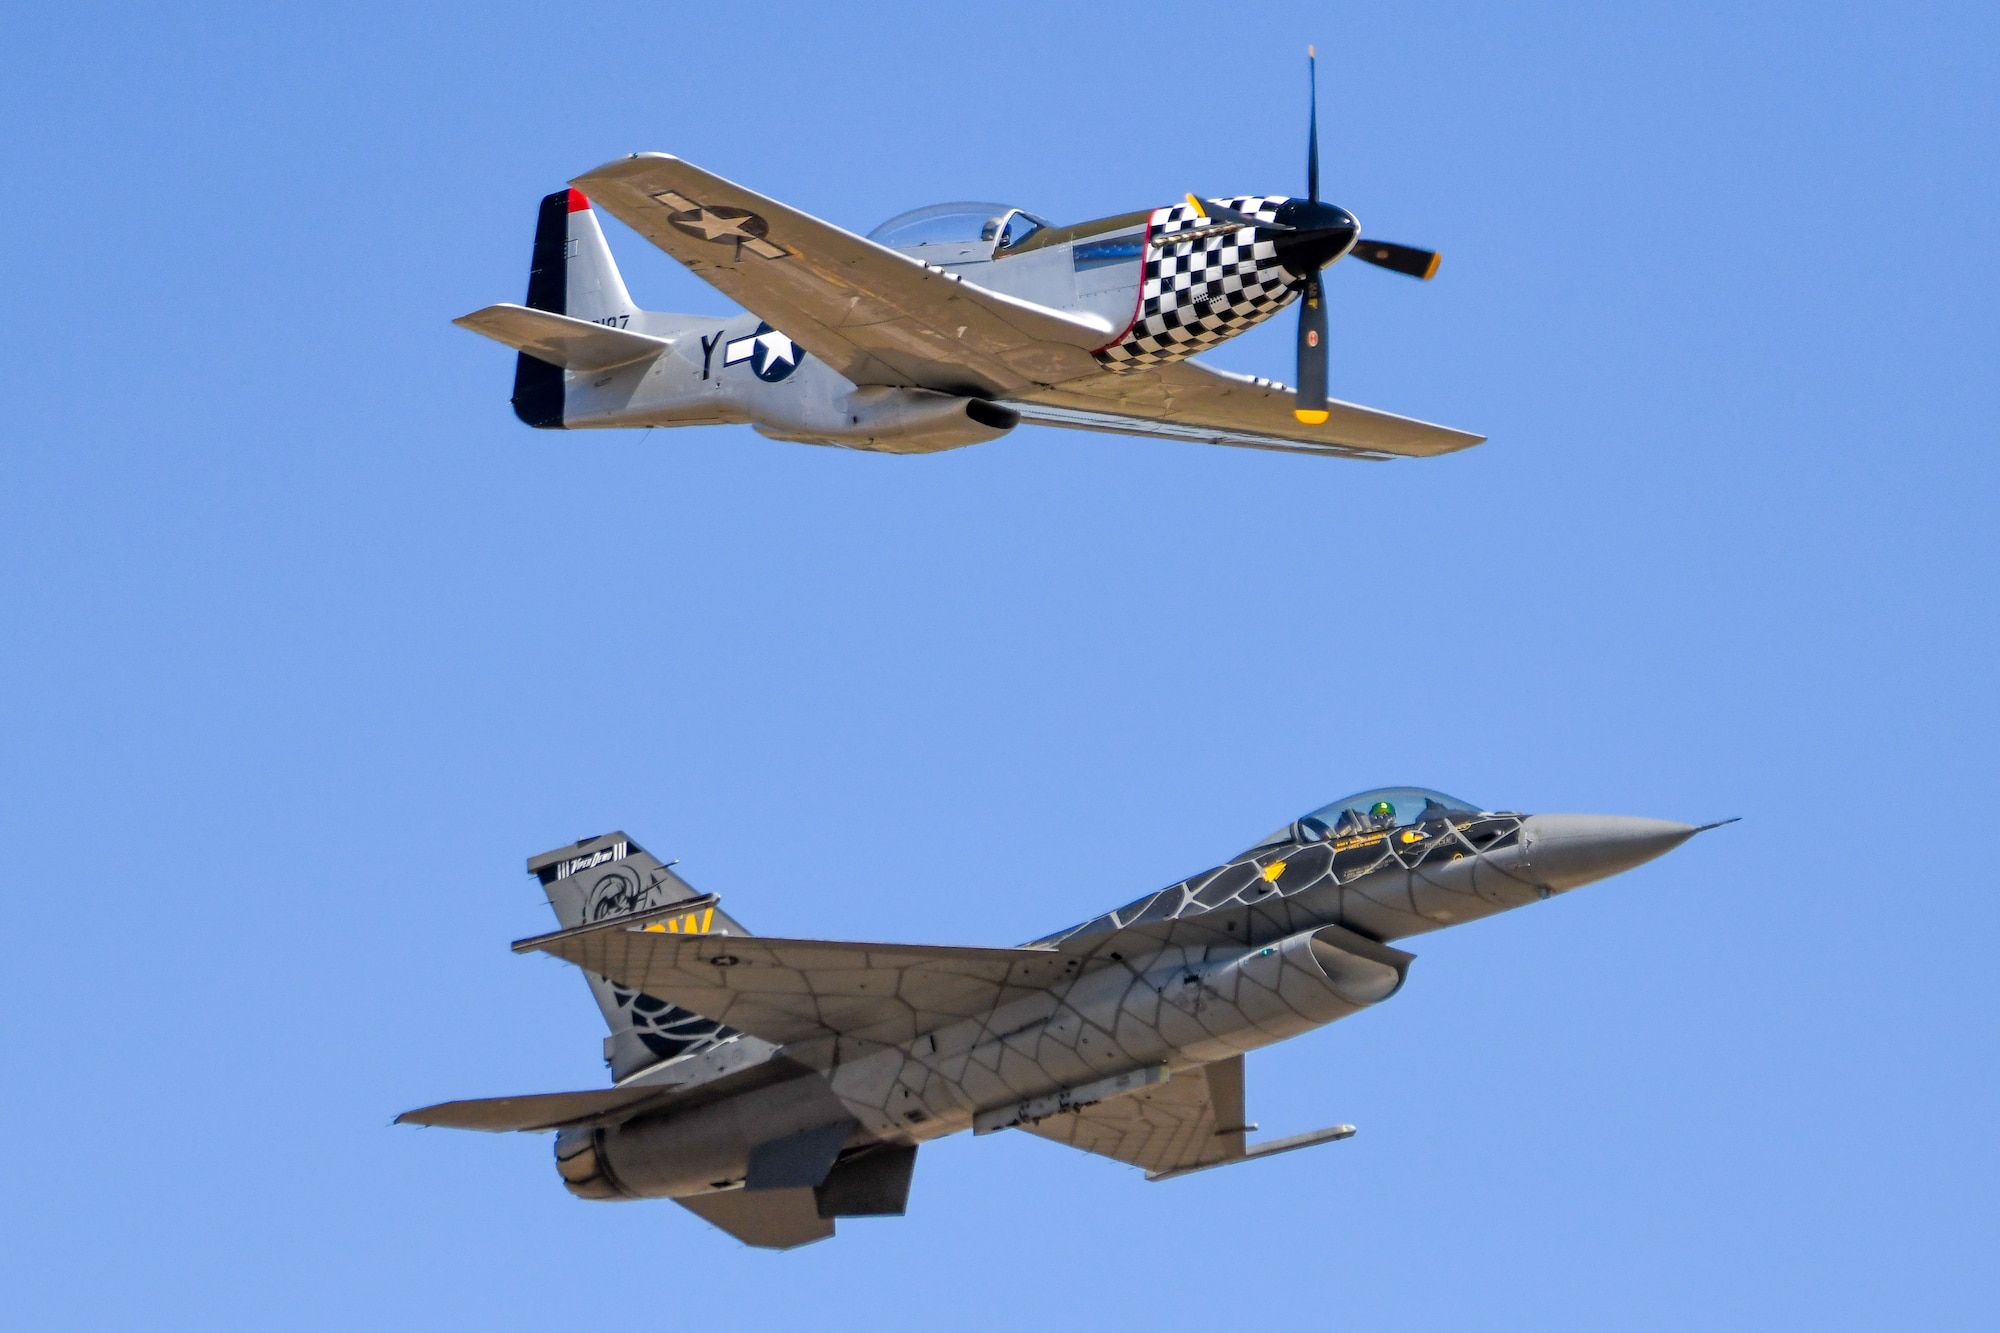 The P-51 Mustang and the F-16 Fighting Falcon fly a heritage flight during the Red River Thunder airshow at Altus Air Force Base, Oklahoma, Oct. 1, 2022. The Viper Demonstration Team includes an F-16 known as “Viper” flown by Capt. Aimee ‘Rebel’ Fiedler, supported by nine other Airmen on the team. (U.S. Air Force photo by Senior Airman Kayla Christenson)